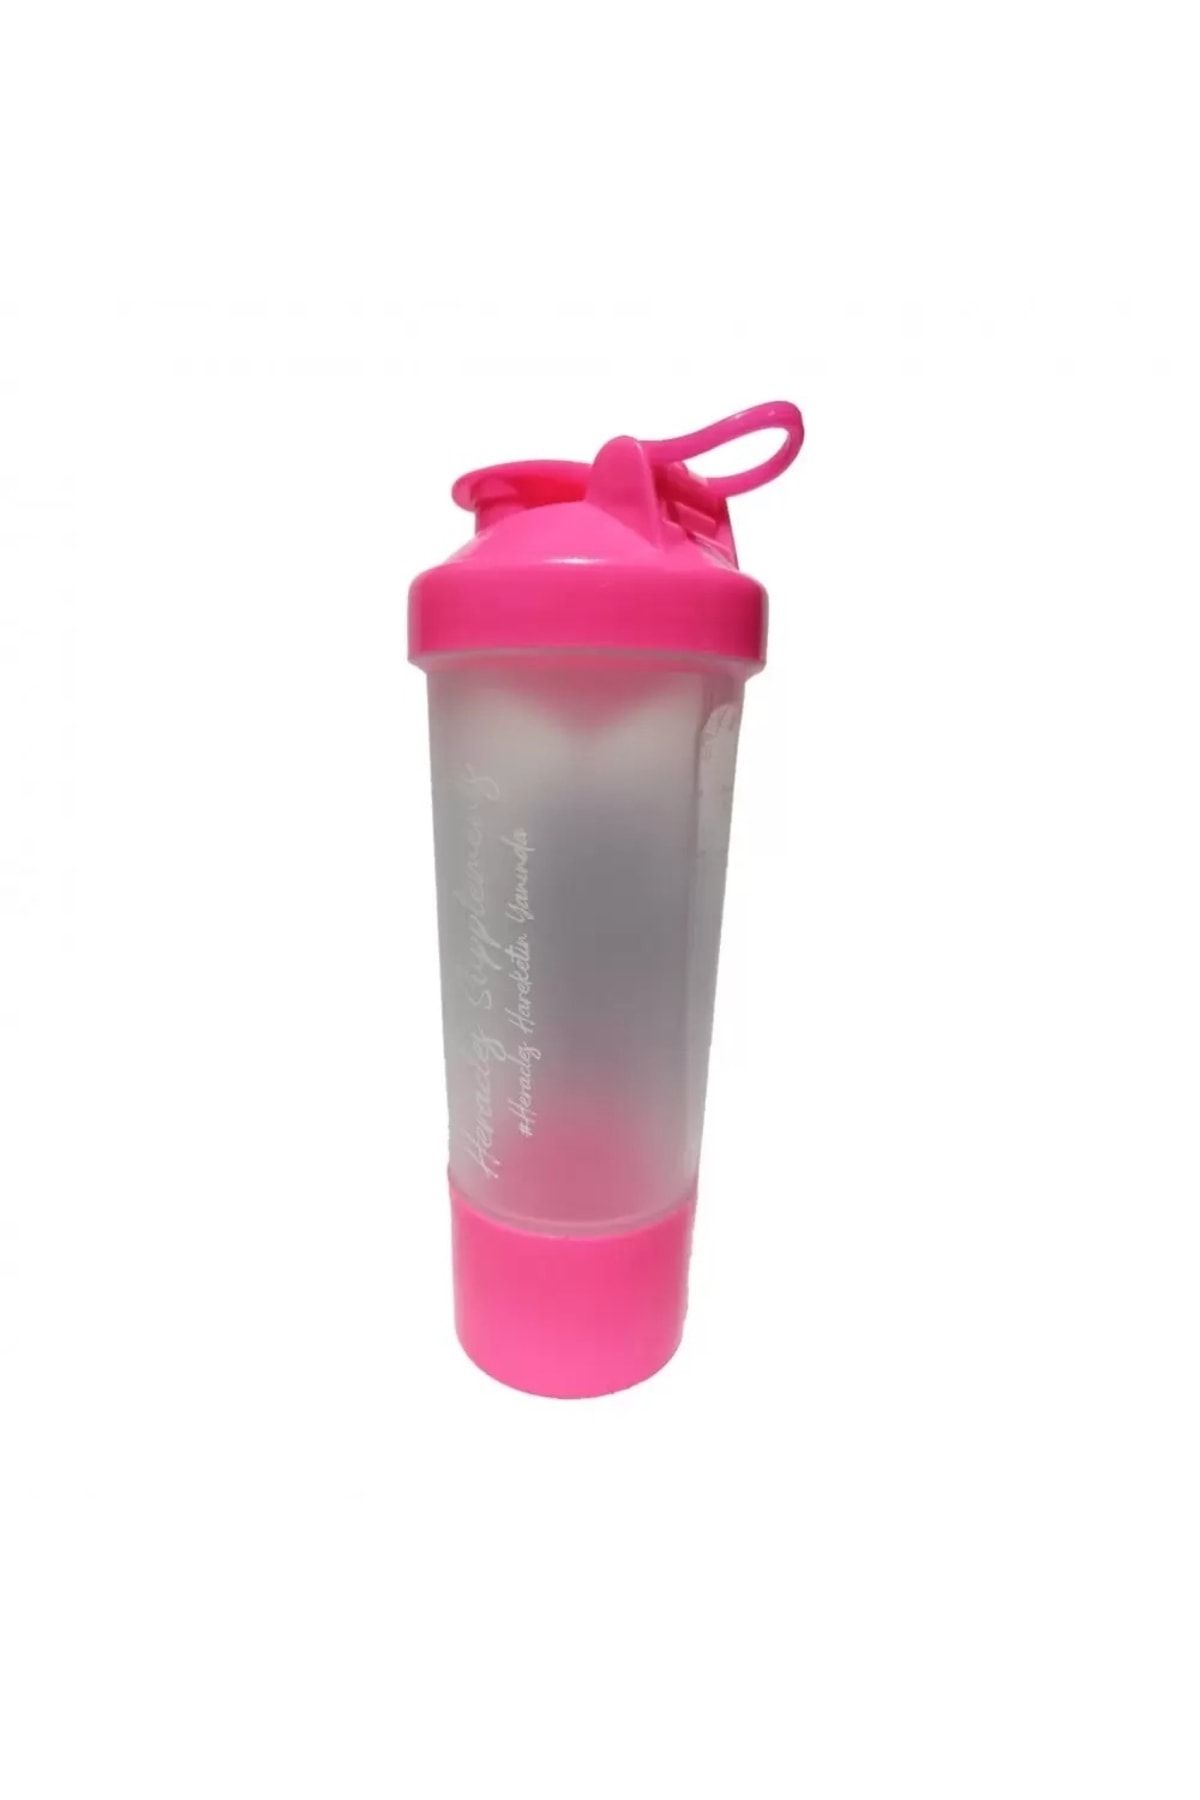 Heracles Supplement Heracles Pink Smart Shaker 400 ml